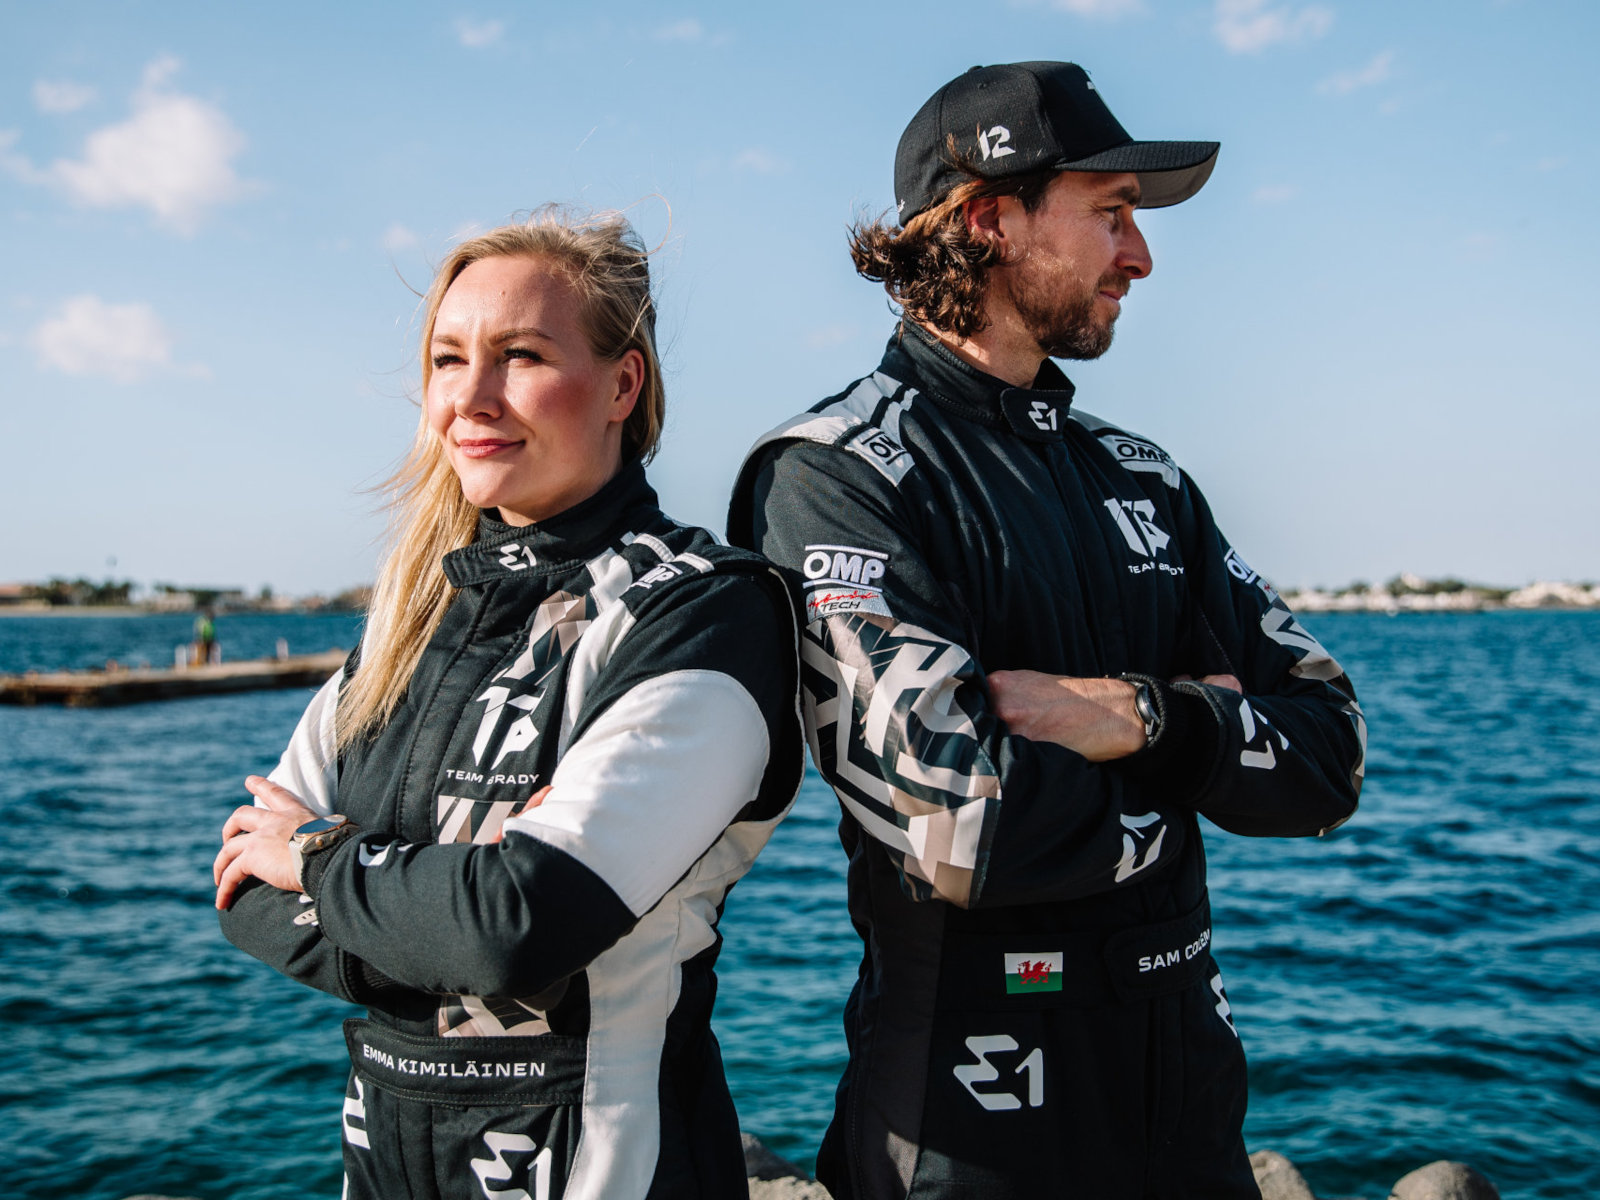 Racing Force Group starts an exciting new chapter as Official Suppliers to Tom Brady’s team in electric powerboat racing